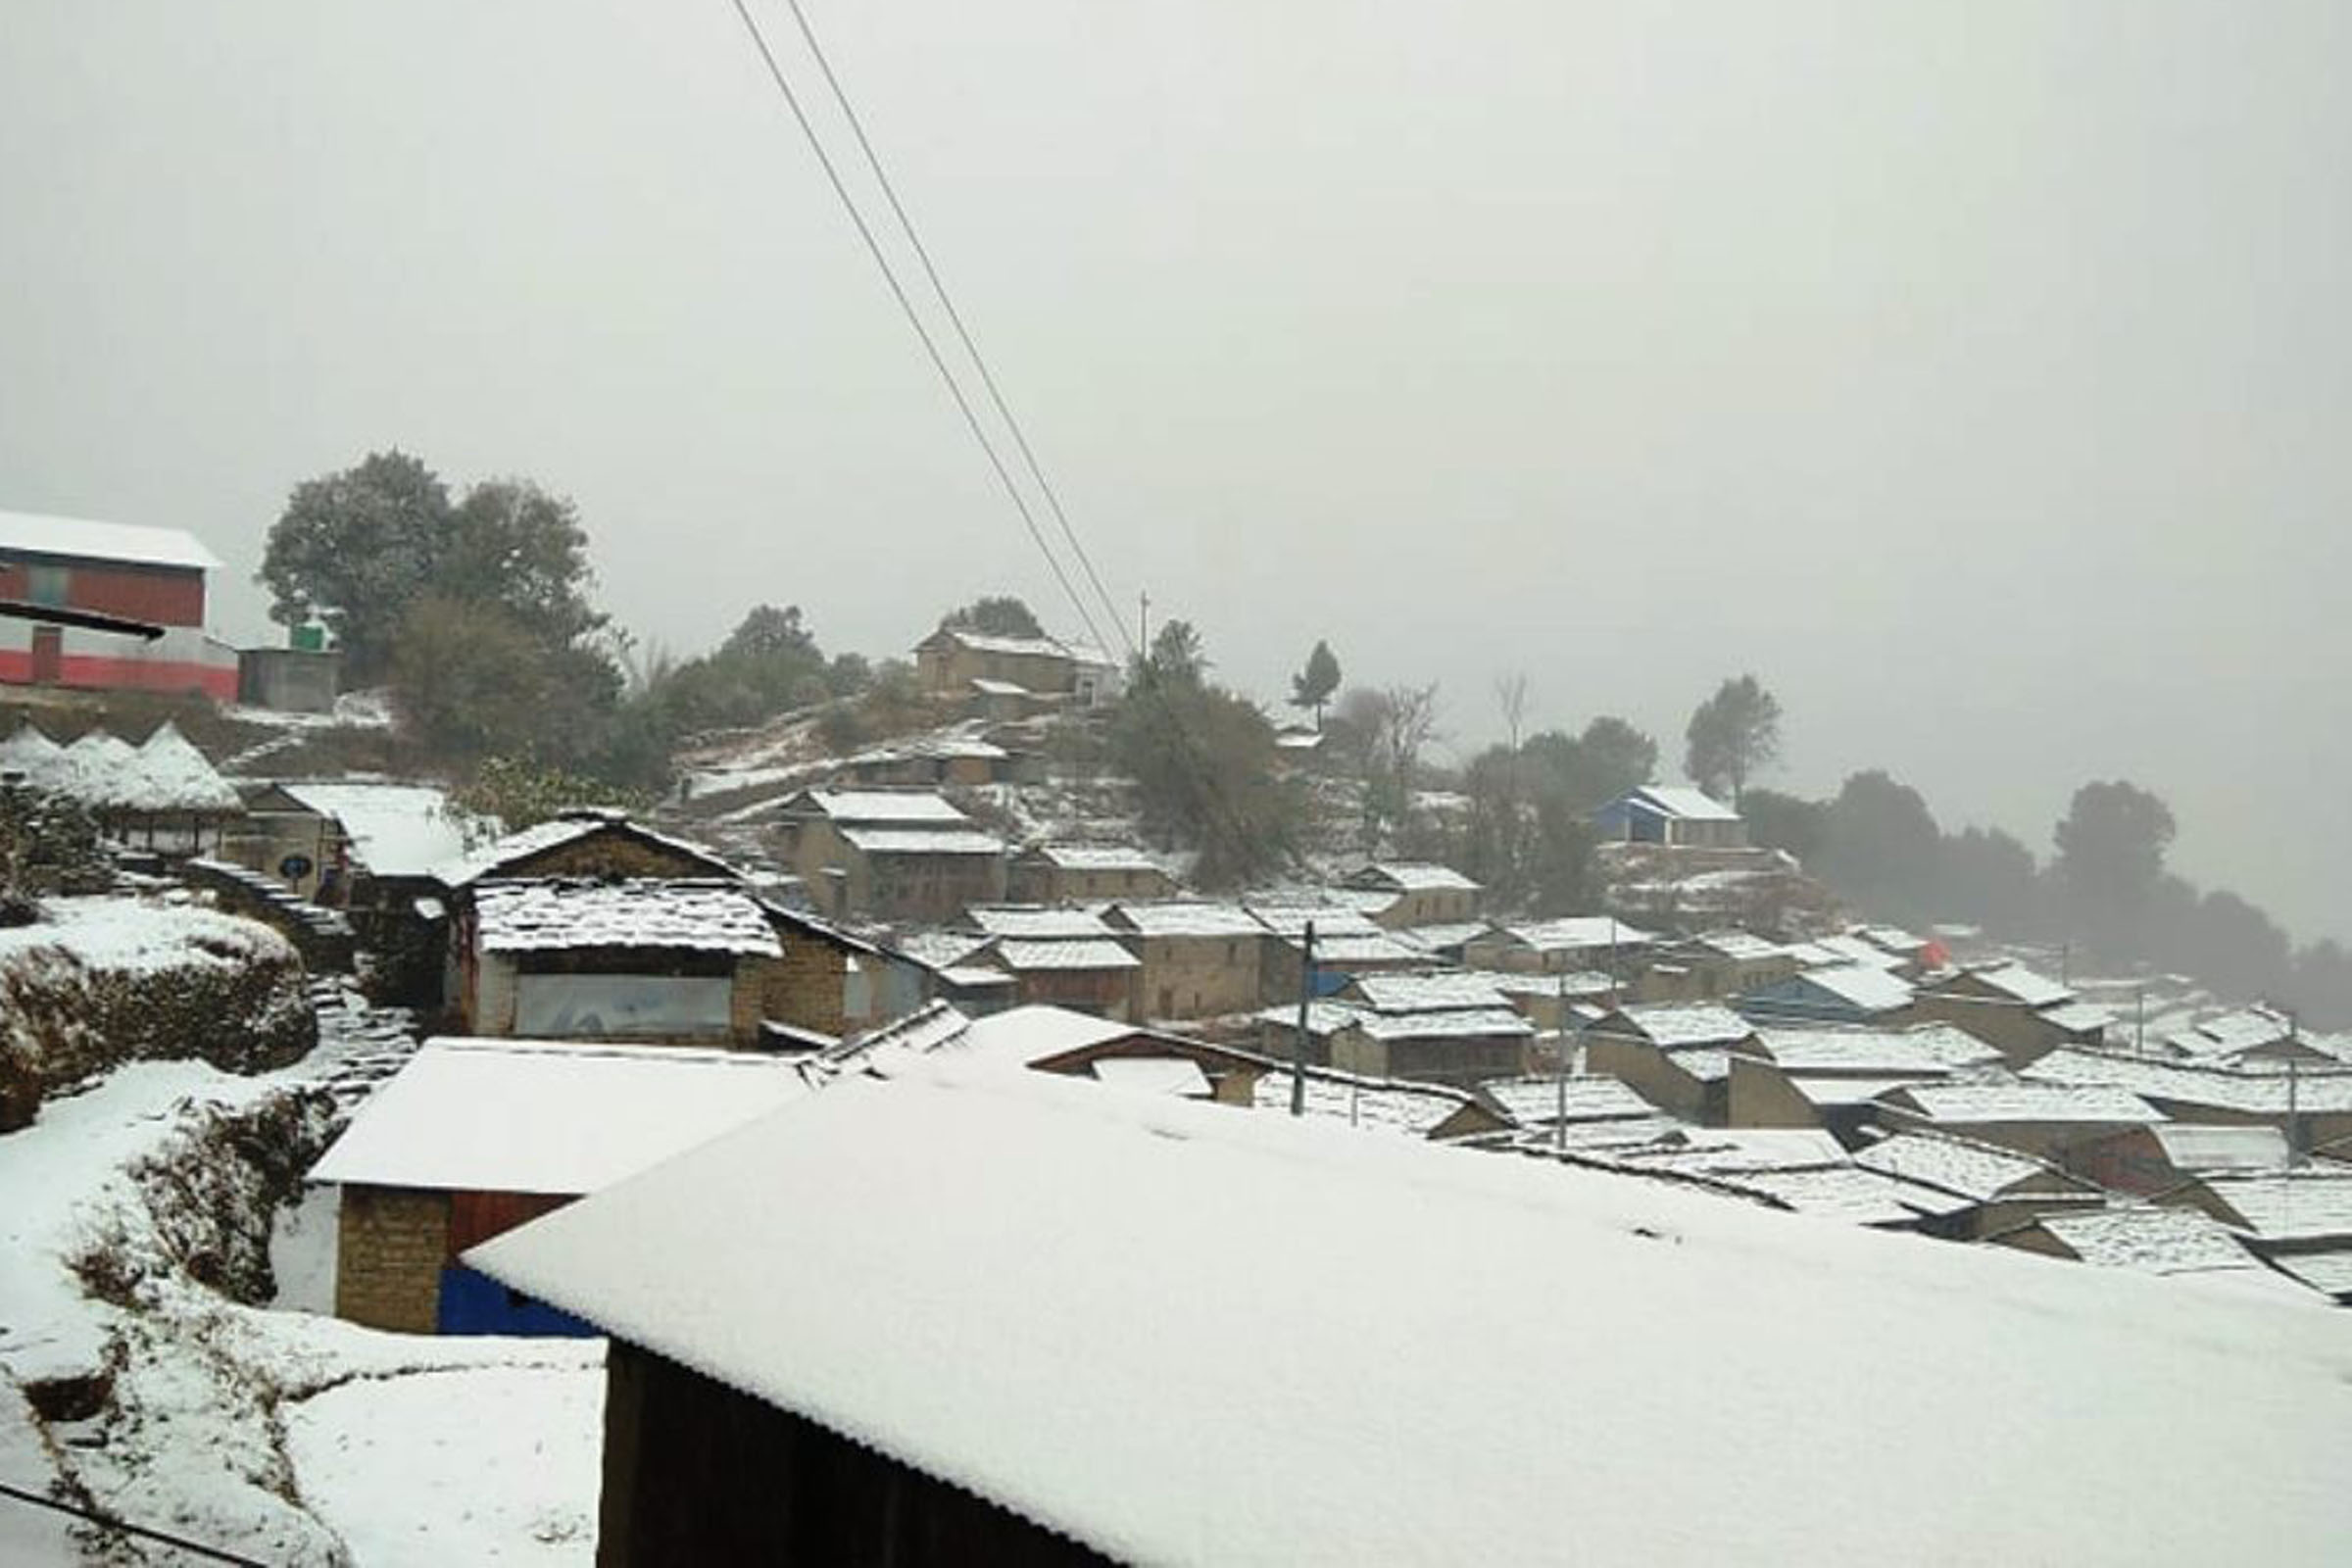 Mets urge caution as Nepal braces for rain and snow